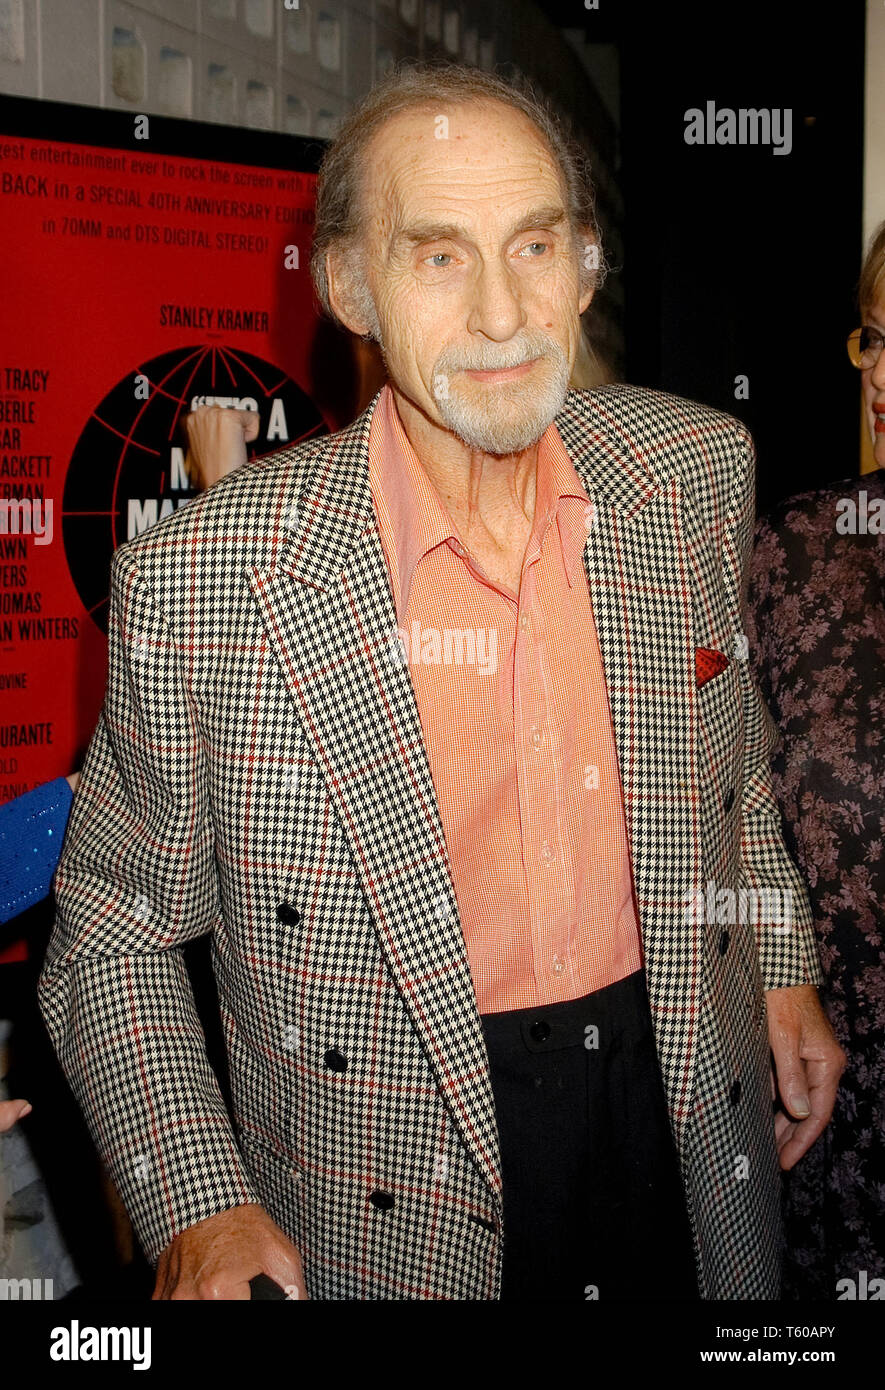 Sid Caesar at the 40th Anniversary of Stanley Kramer's "It's A Mad, Mad, Mad Mad World" and 40th Anniversary of Arclight Hollywood's Cinerama Dome  at the Arclight Hollywoods Cinerama Dome Theater in Hollywood, CA. The event took place on Thursday, October 16, 2003. Photo by: SBM / PictureLux  File Reference # 33790_1080SBMPLX Stock Photo